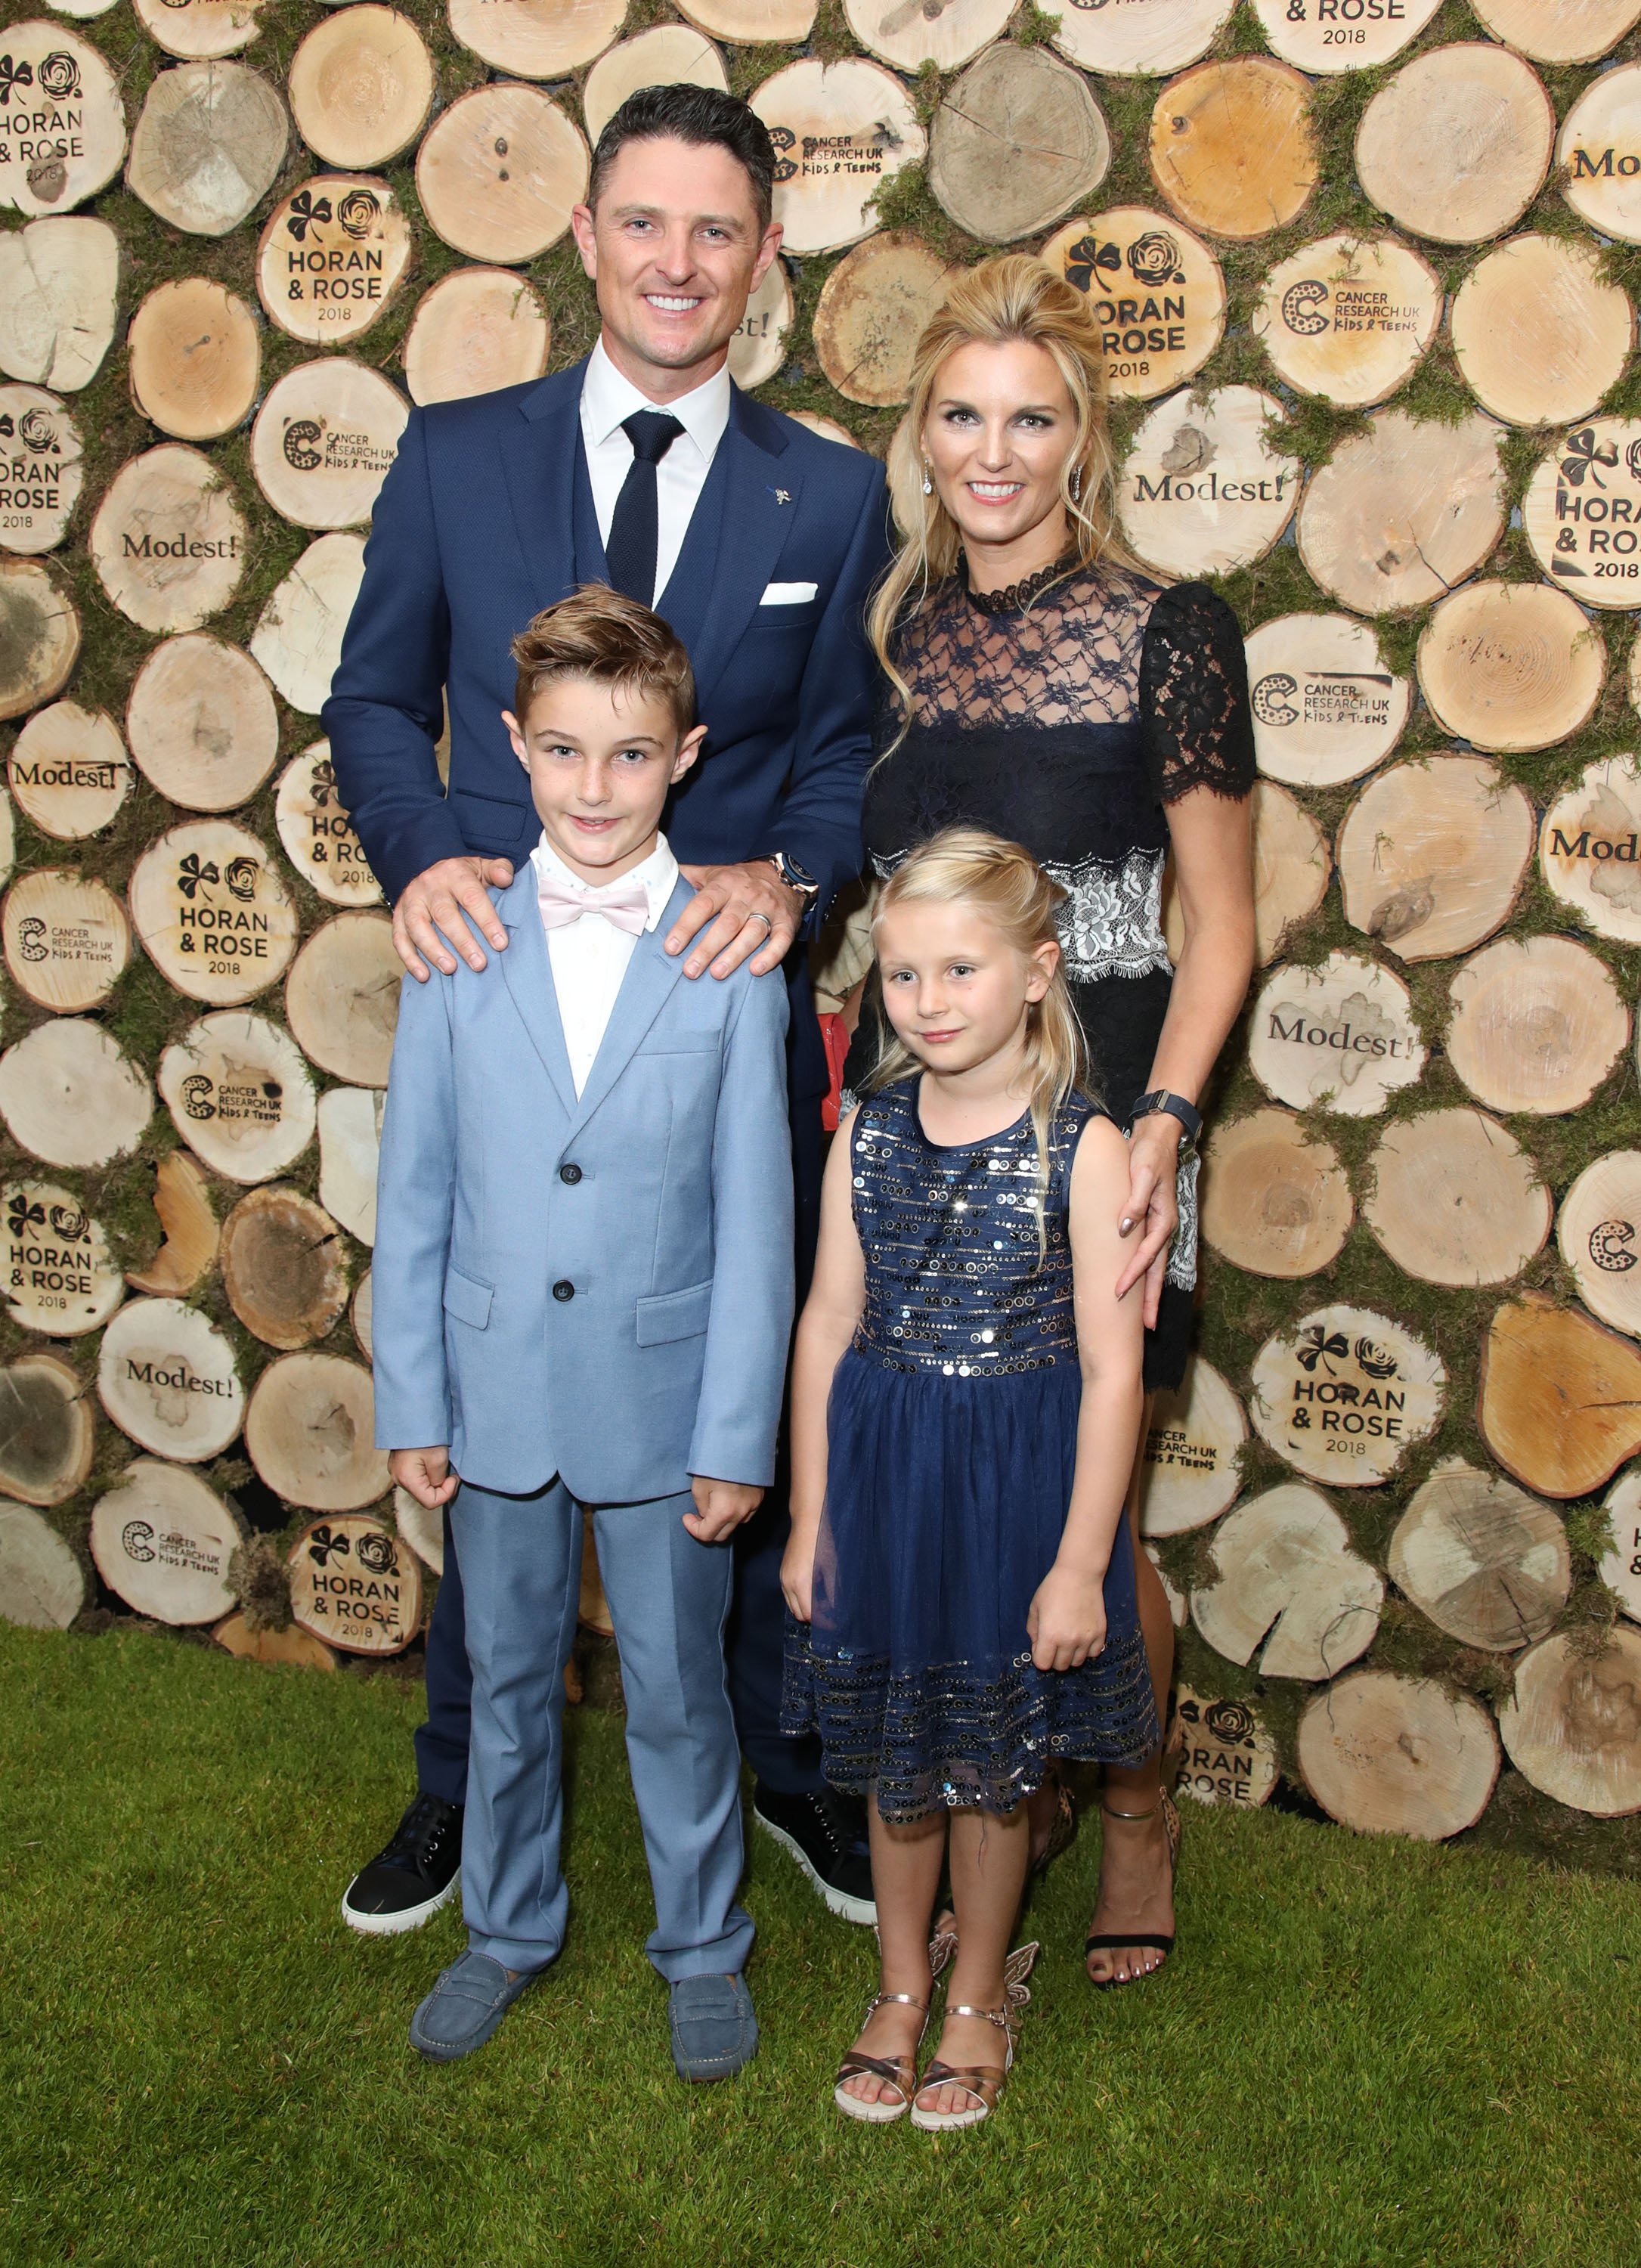 Justin Rose and Kate Phillips Rose attend the Horan And Rose Charity Event held at The Grove with their children